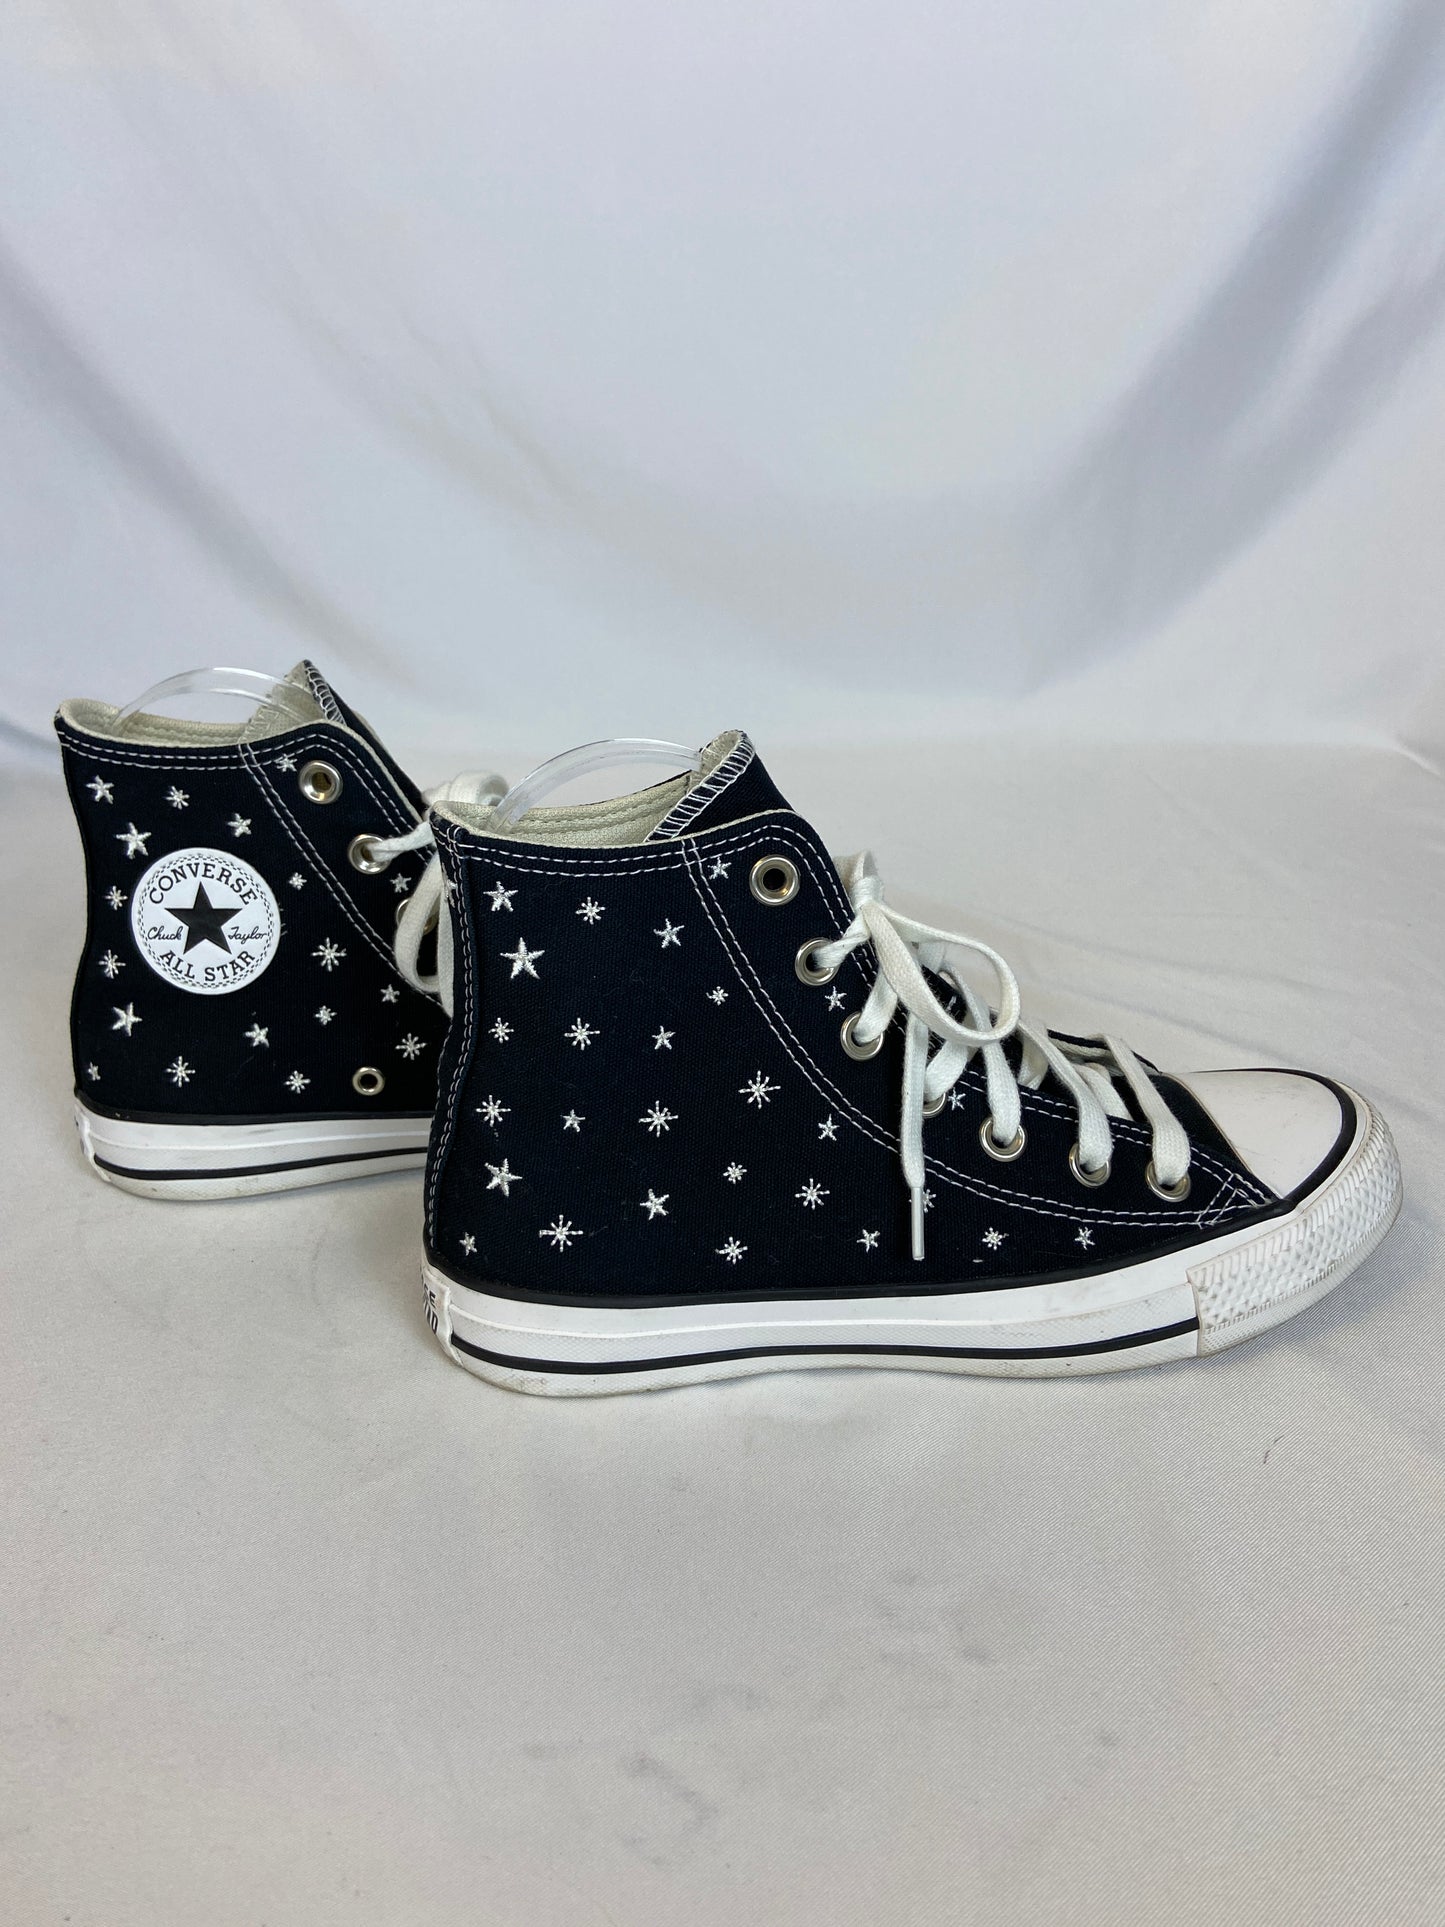 Converse Size 6 Black & White Chuck Taylor All Star Crystal Energy High Top Sneakers